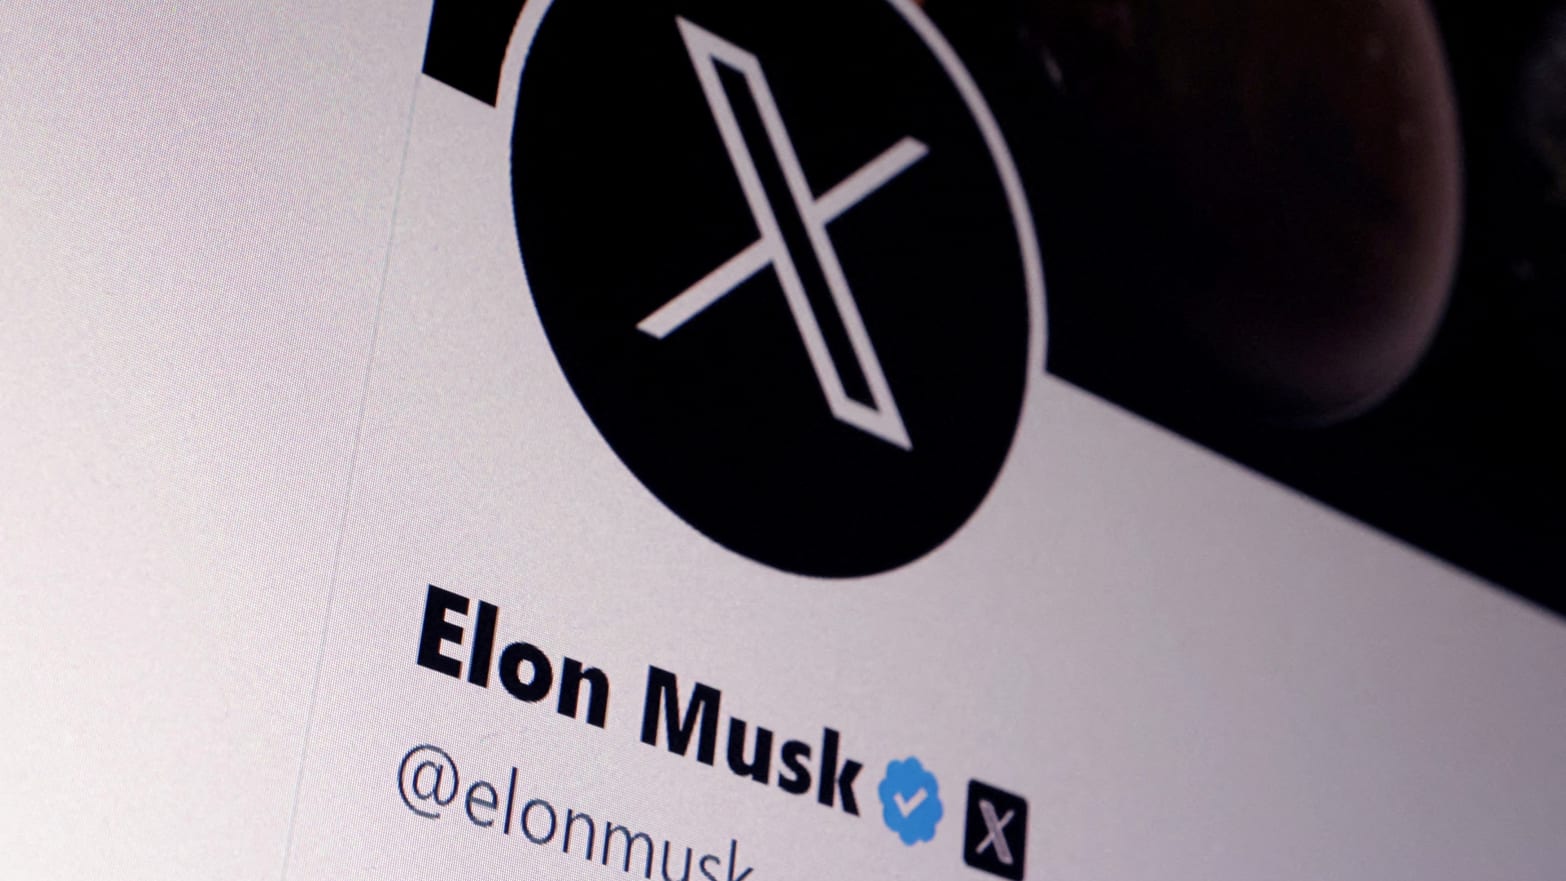 Elon Musk 's X account is seen in this illustration